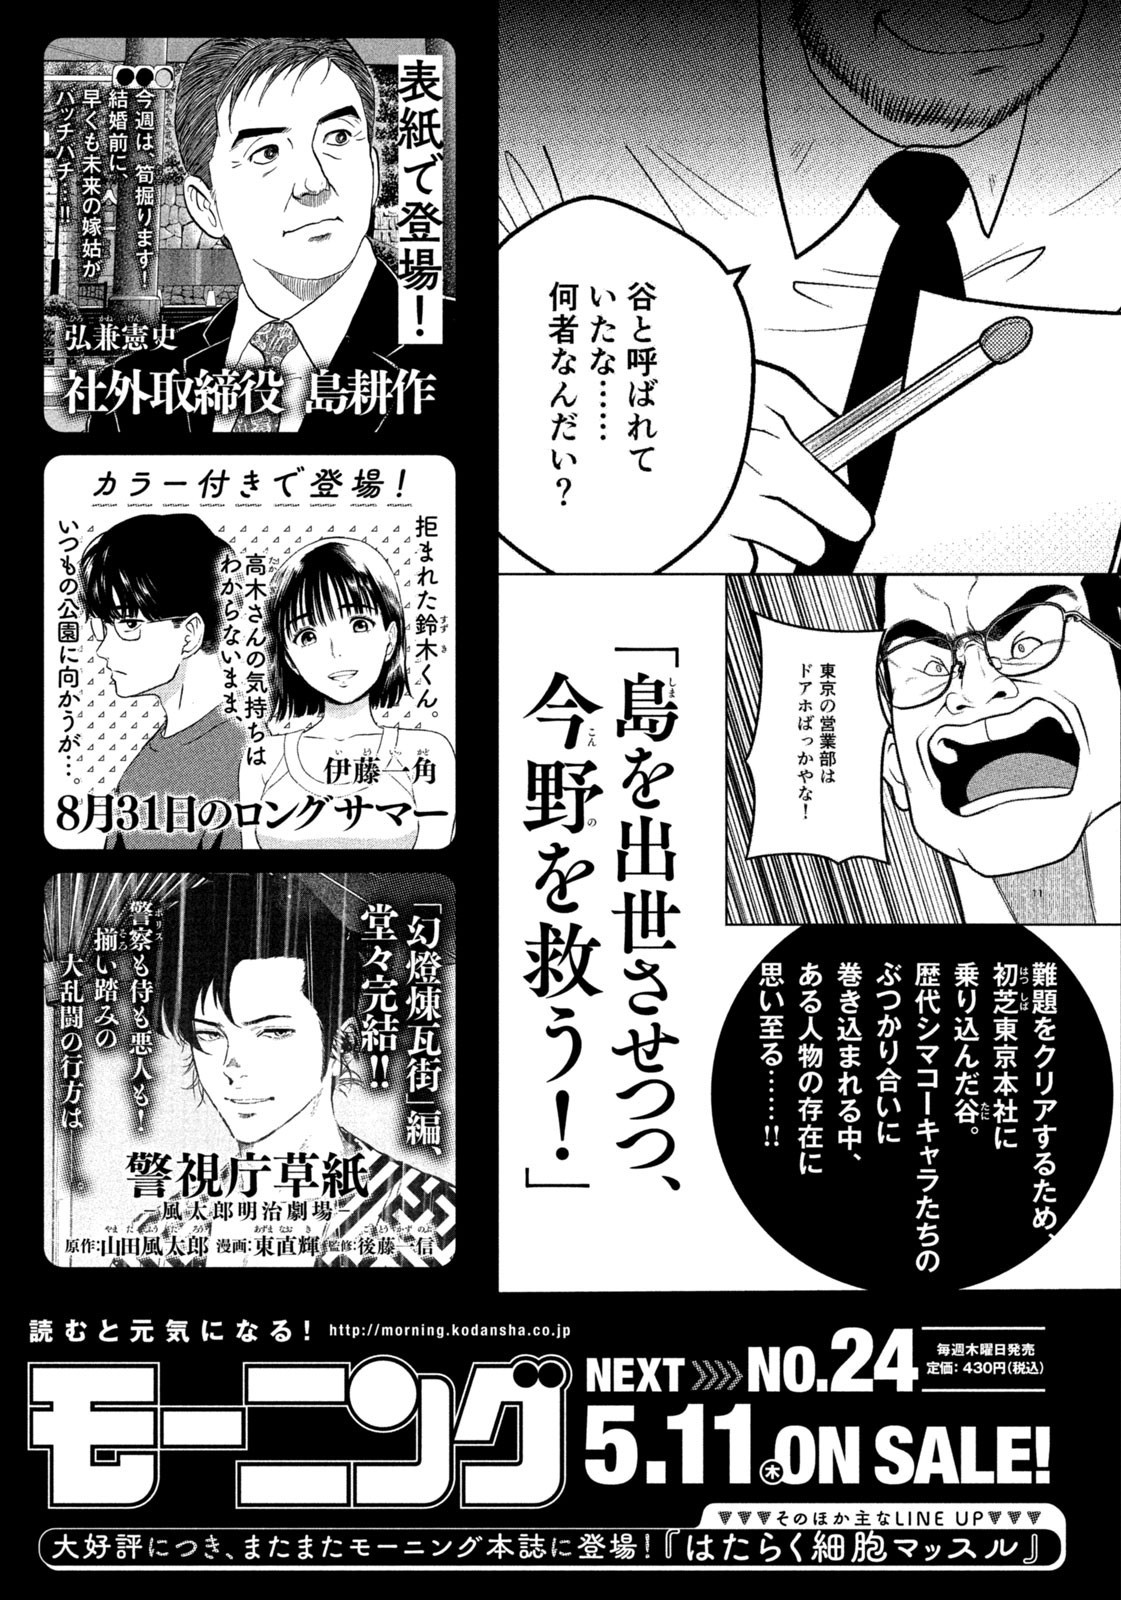 Weekly Morning - 週刊モーニング - Chapter 2023-22-23 - Page 420